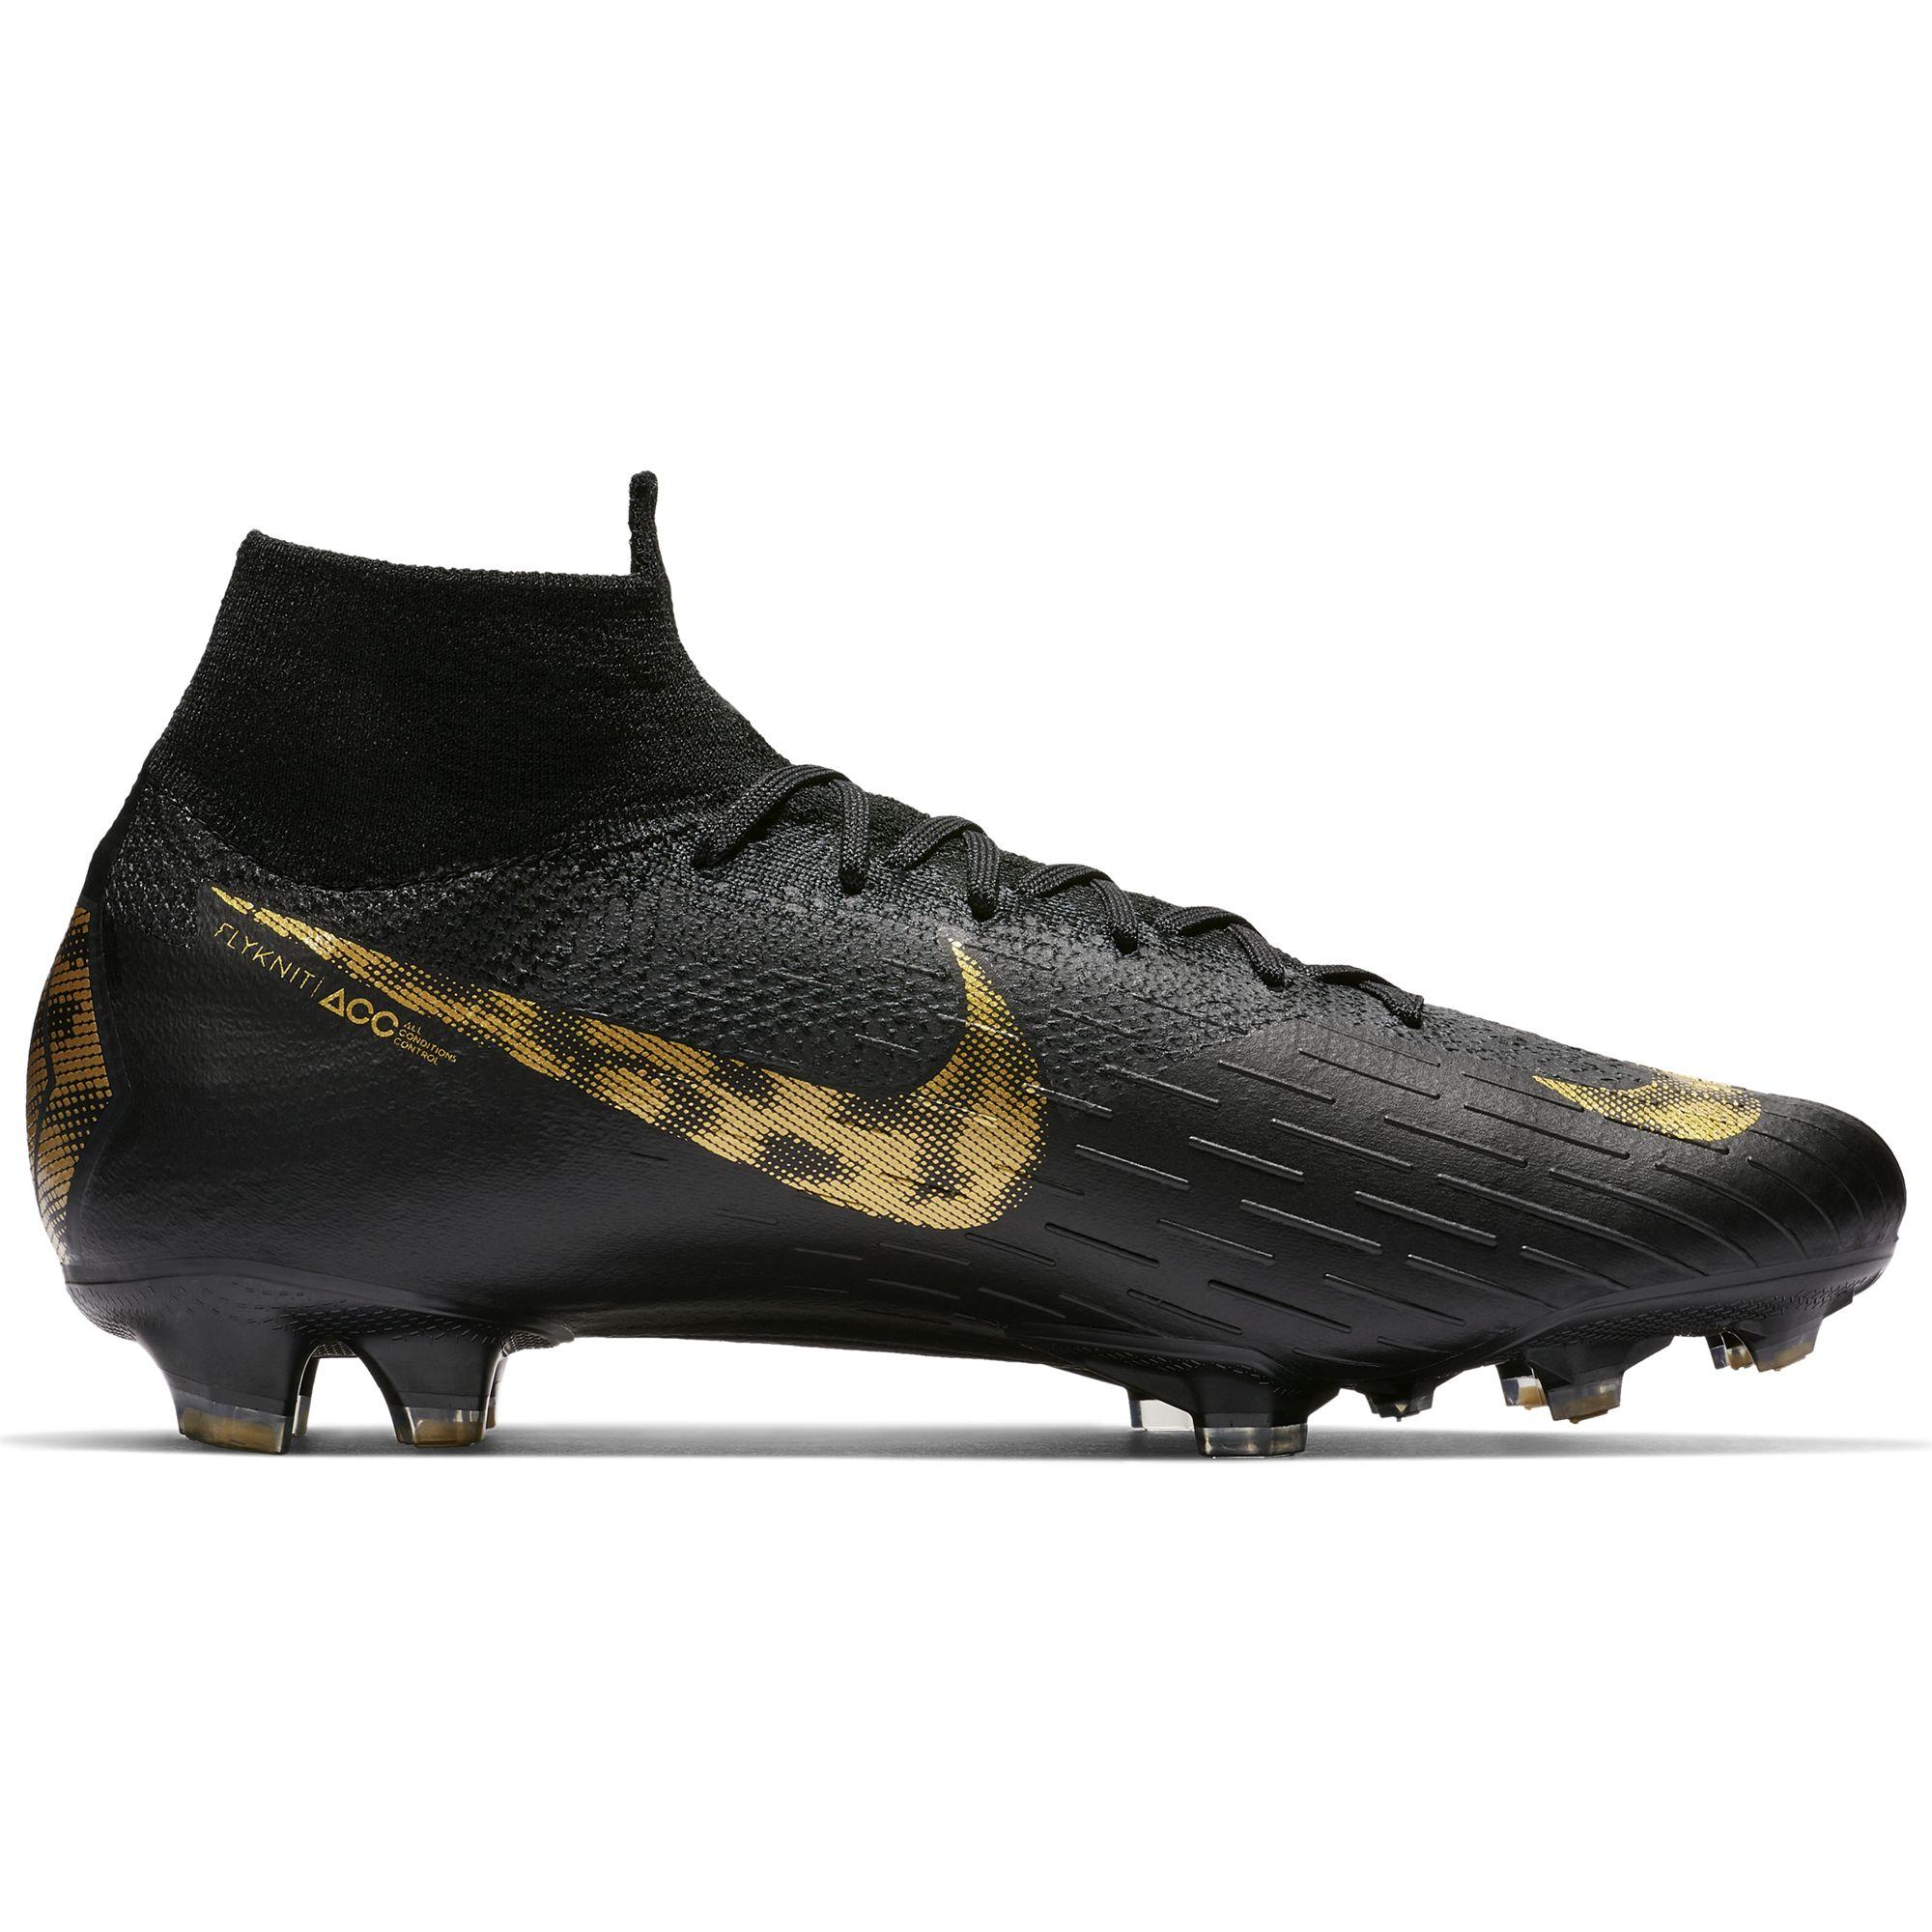 Superfly 6 Elite FG Firm Ground Soccer Cleat Football boots.